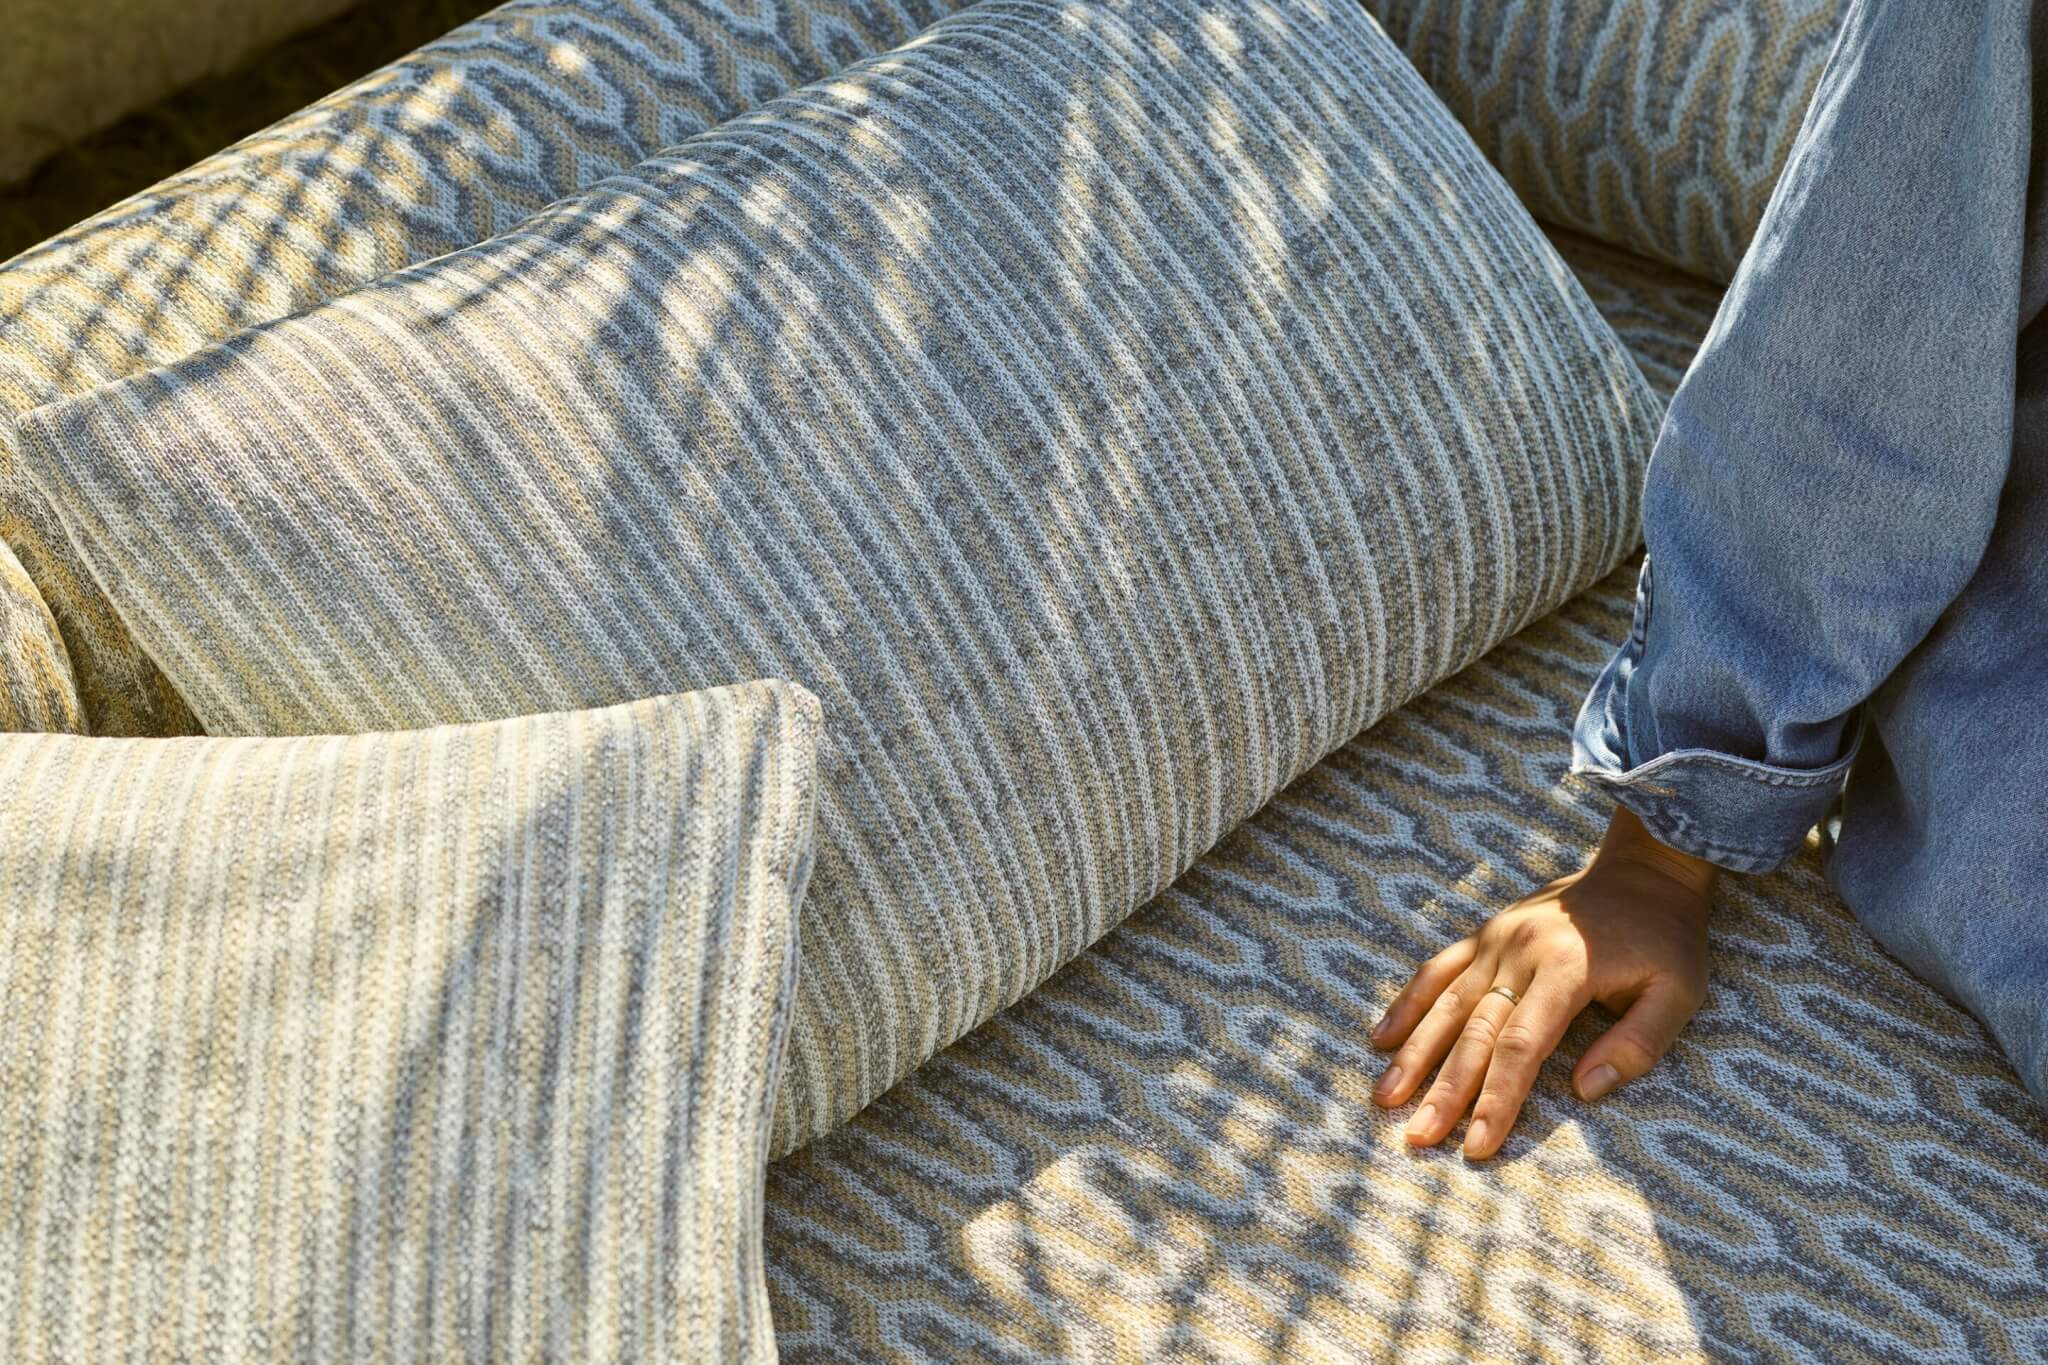 A soft, patterned sofa